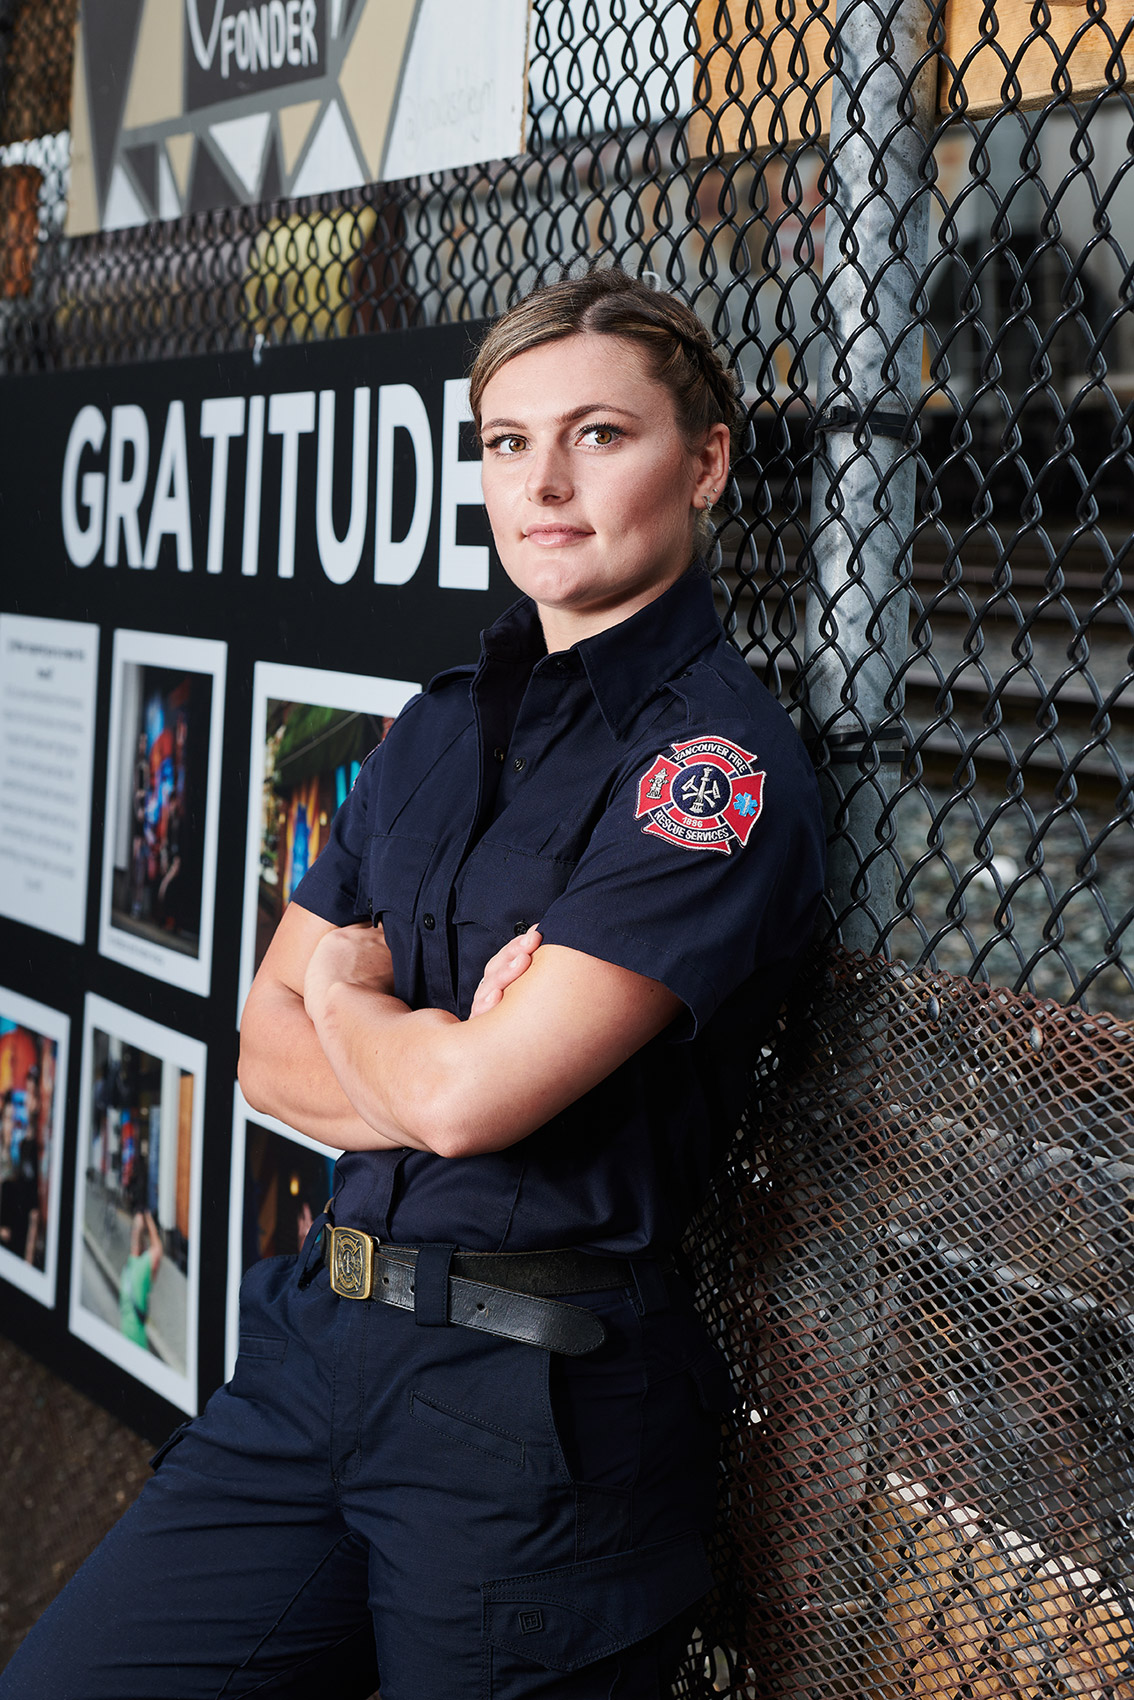 HOF-Hall-of-Flame-Calender-Erich-Saide-Vancouver-Portrait-Photographer-Female-Firefighters-First-Responders-Hot-Hero-May-Lauren-Uniform